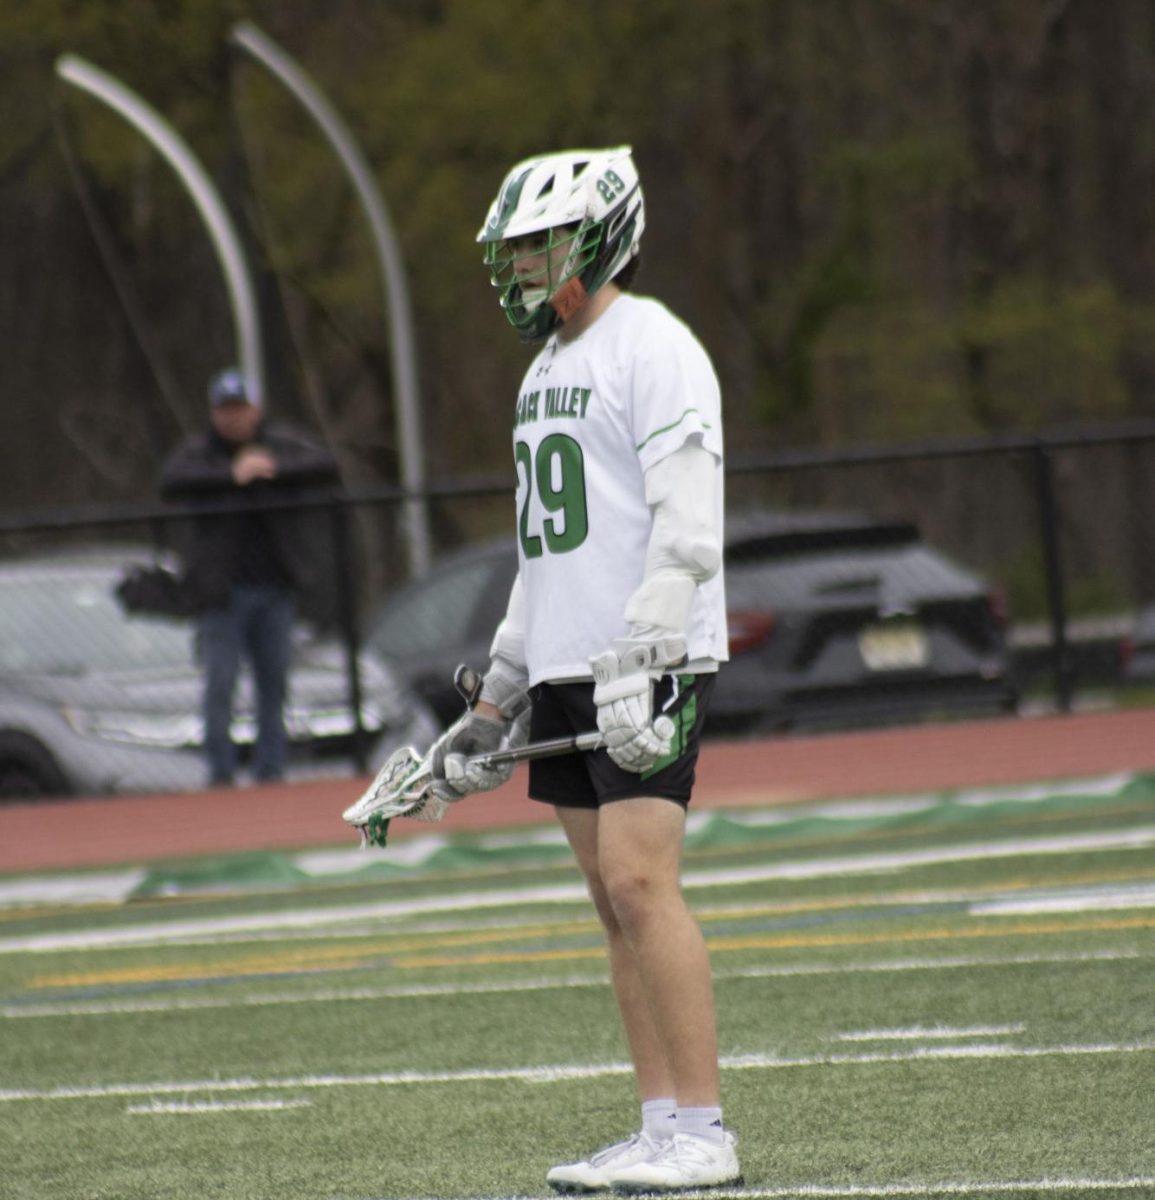 Junior lacrosse player Donnie Duffus notches 100th career point